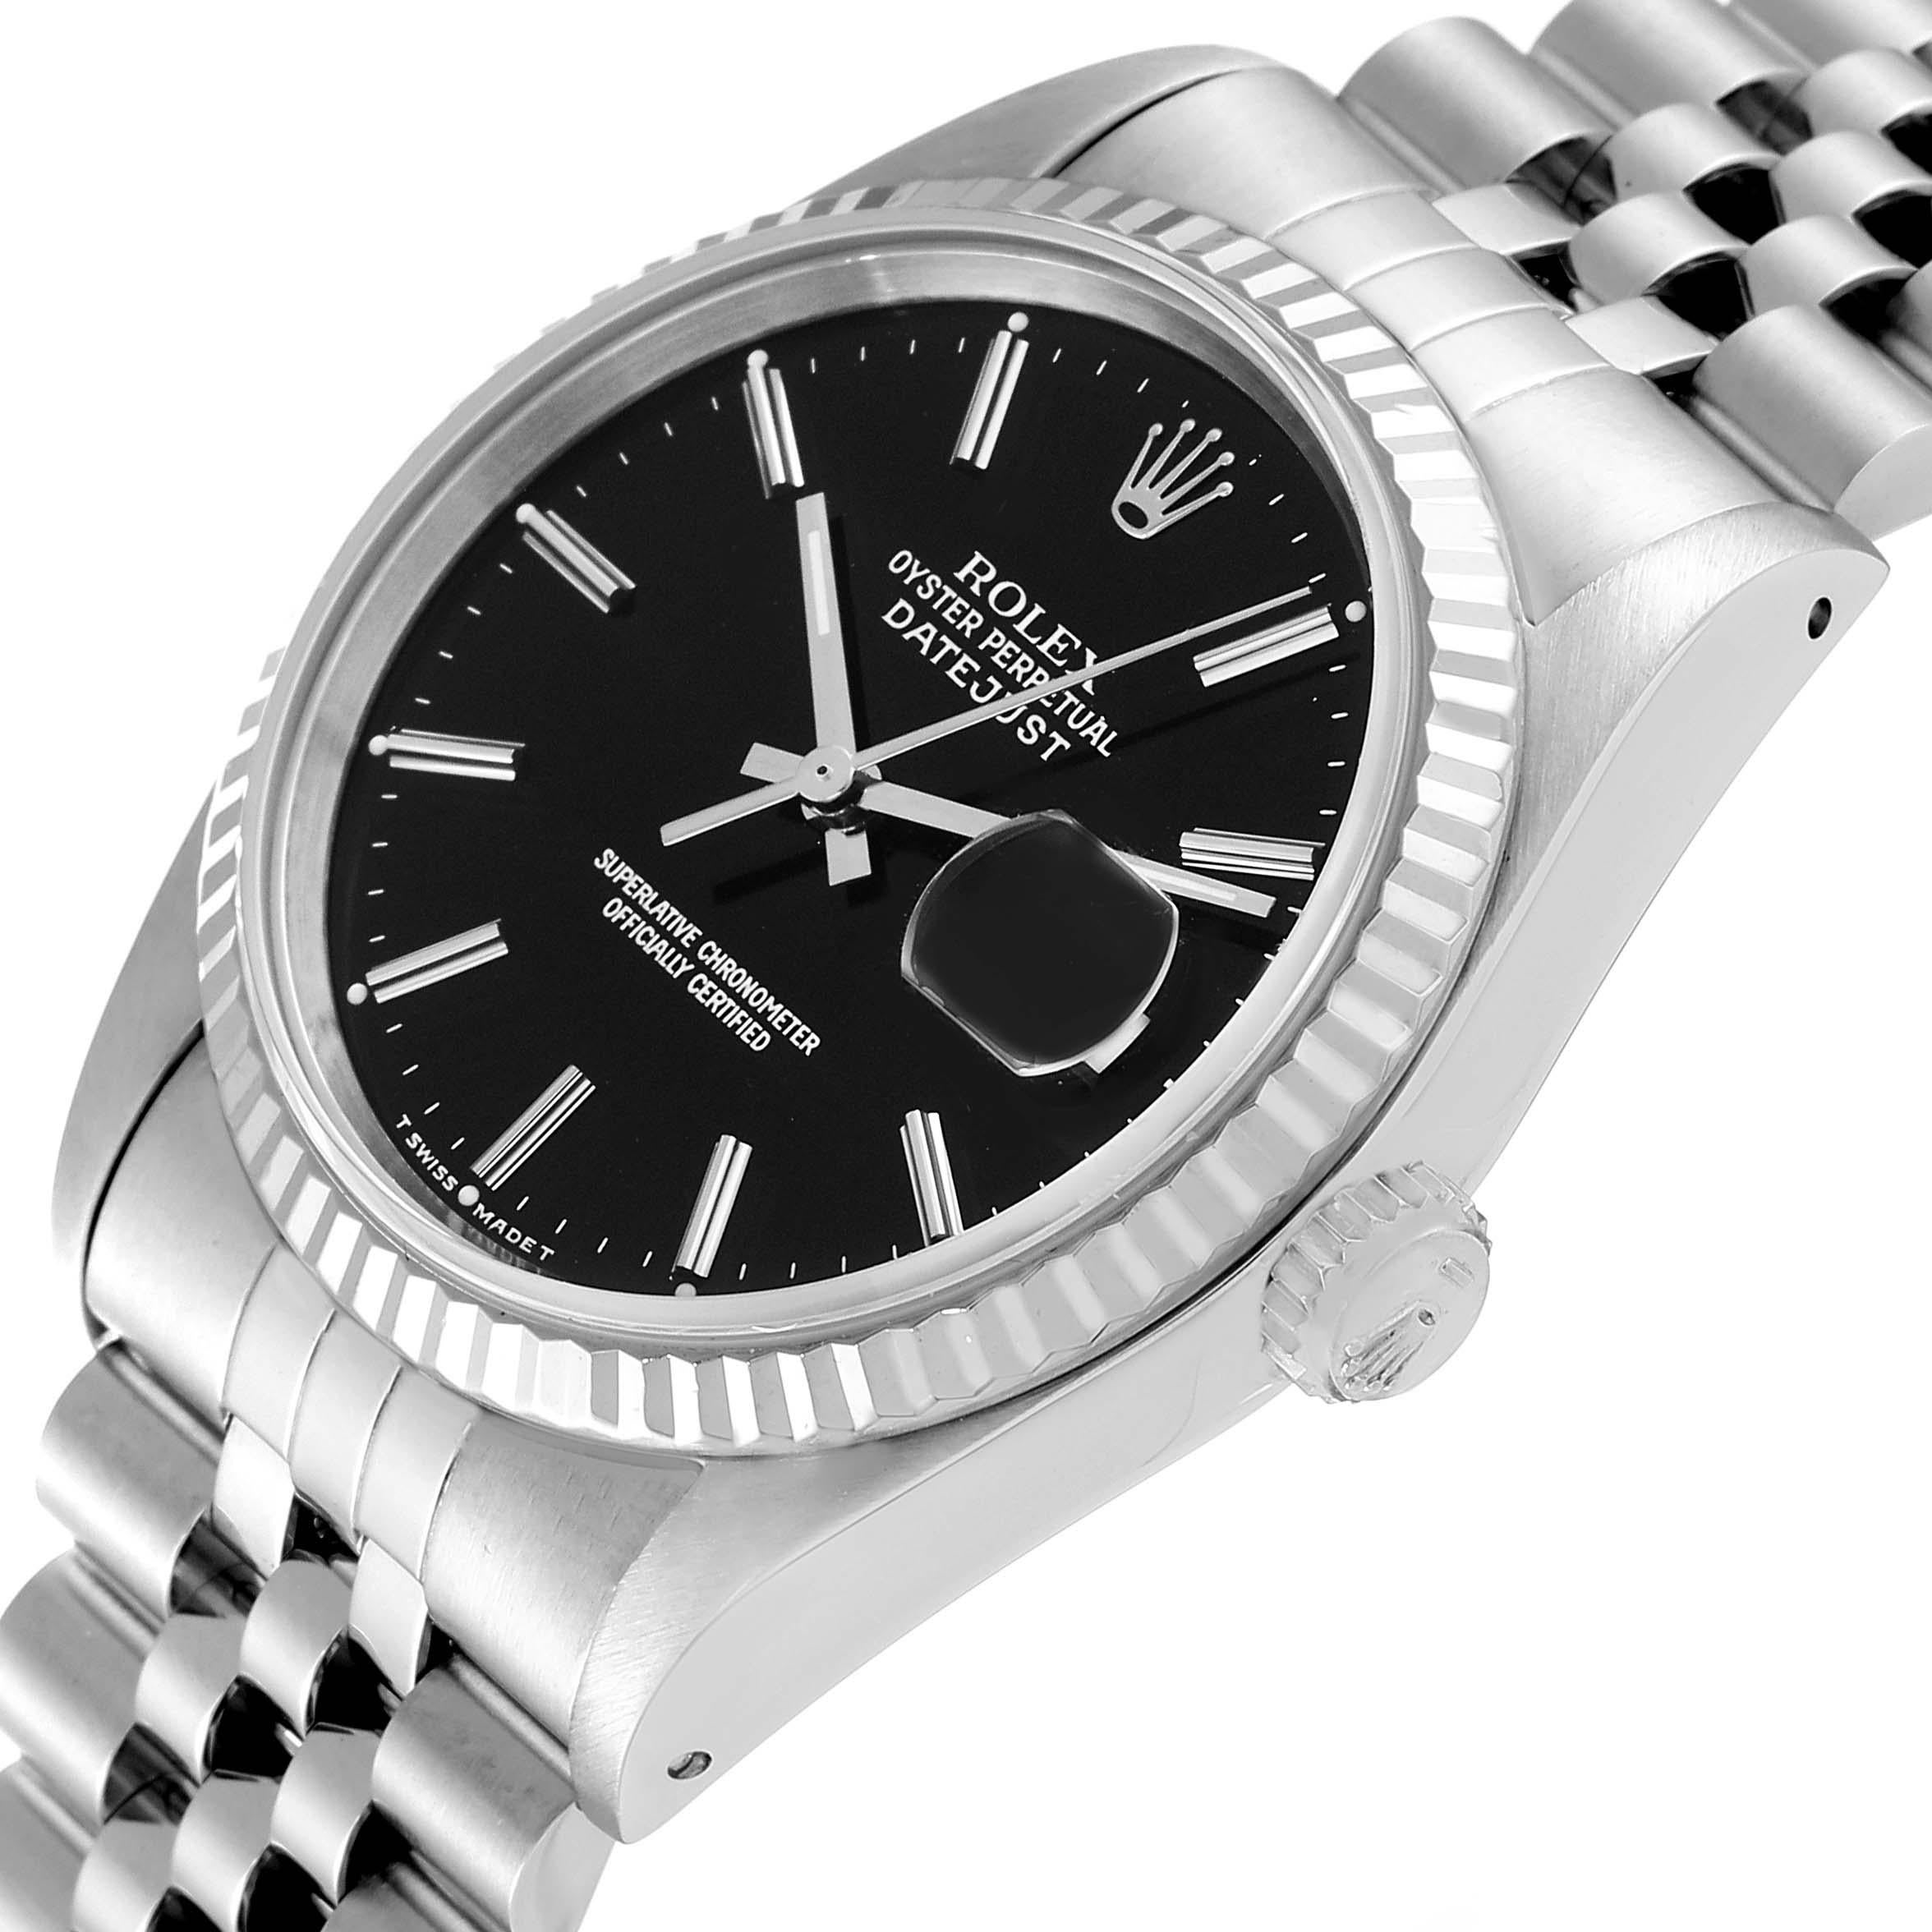 Rolex Datejust Steel White Gold Black Dial Mens Watch 16234 Box Papers 1